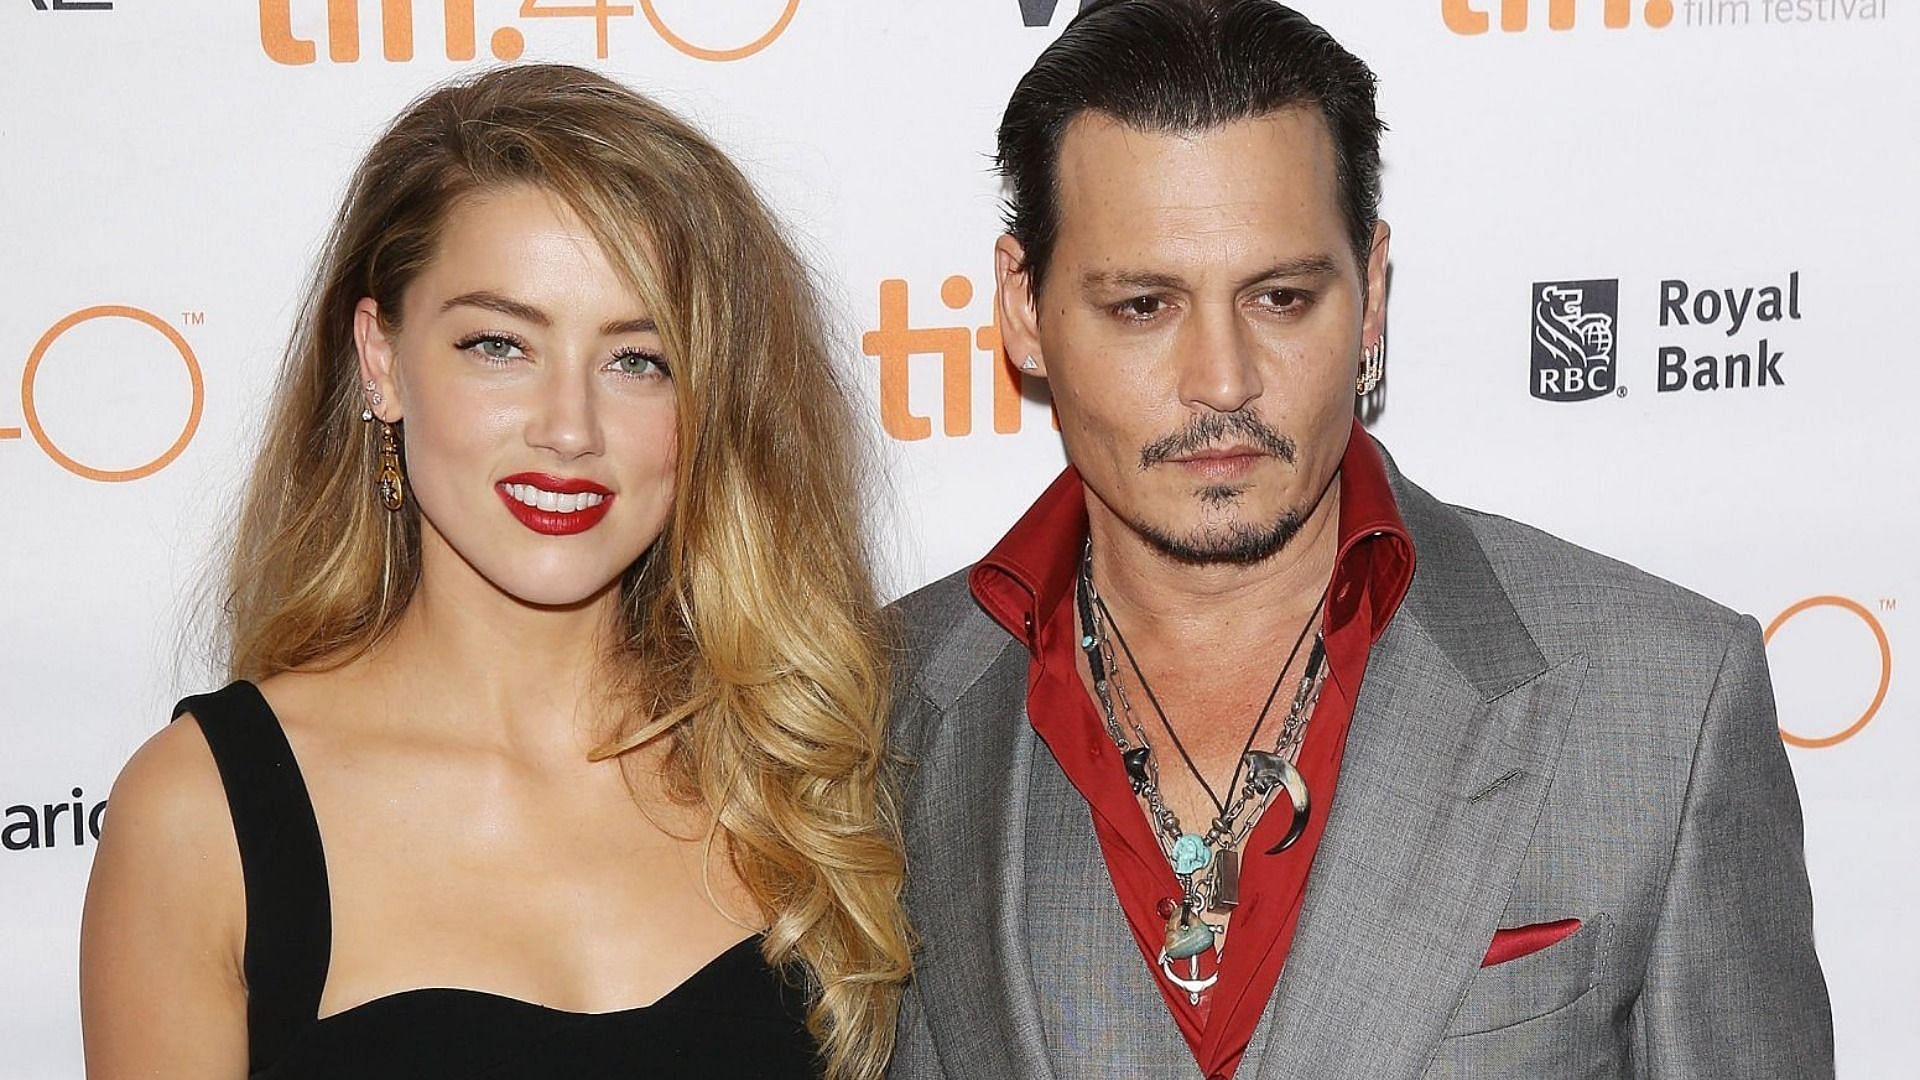 Johnny Depp compared Amber Heard to a &quot;flappy fish market&quot; in one of his texts (Image via Getty Images)